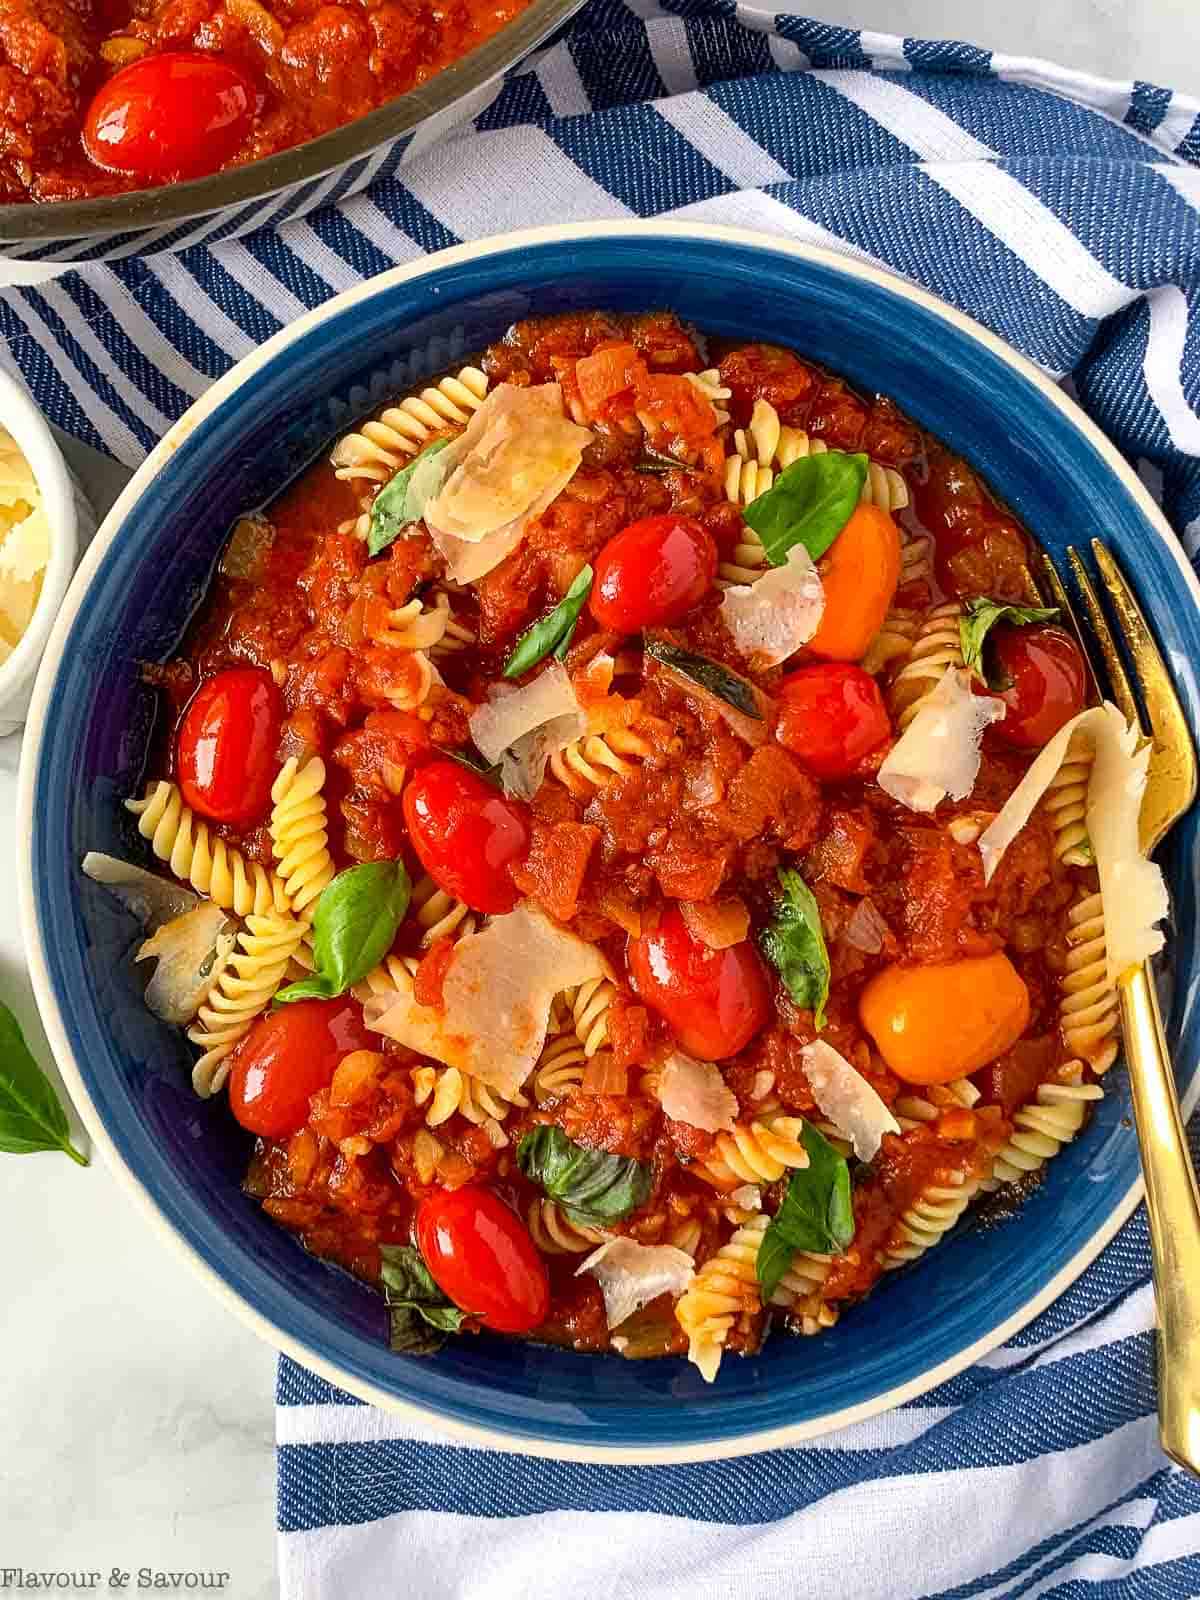 A bowl with gluten-free pasta, arrabbiata sauce and cherry tomatoes.